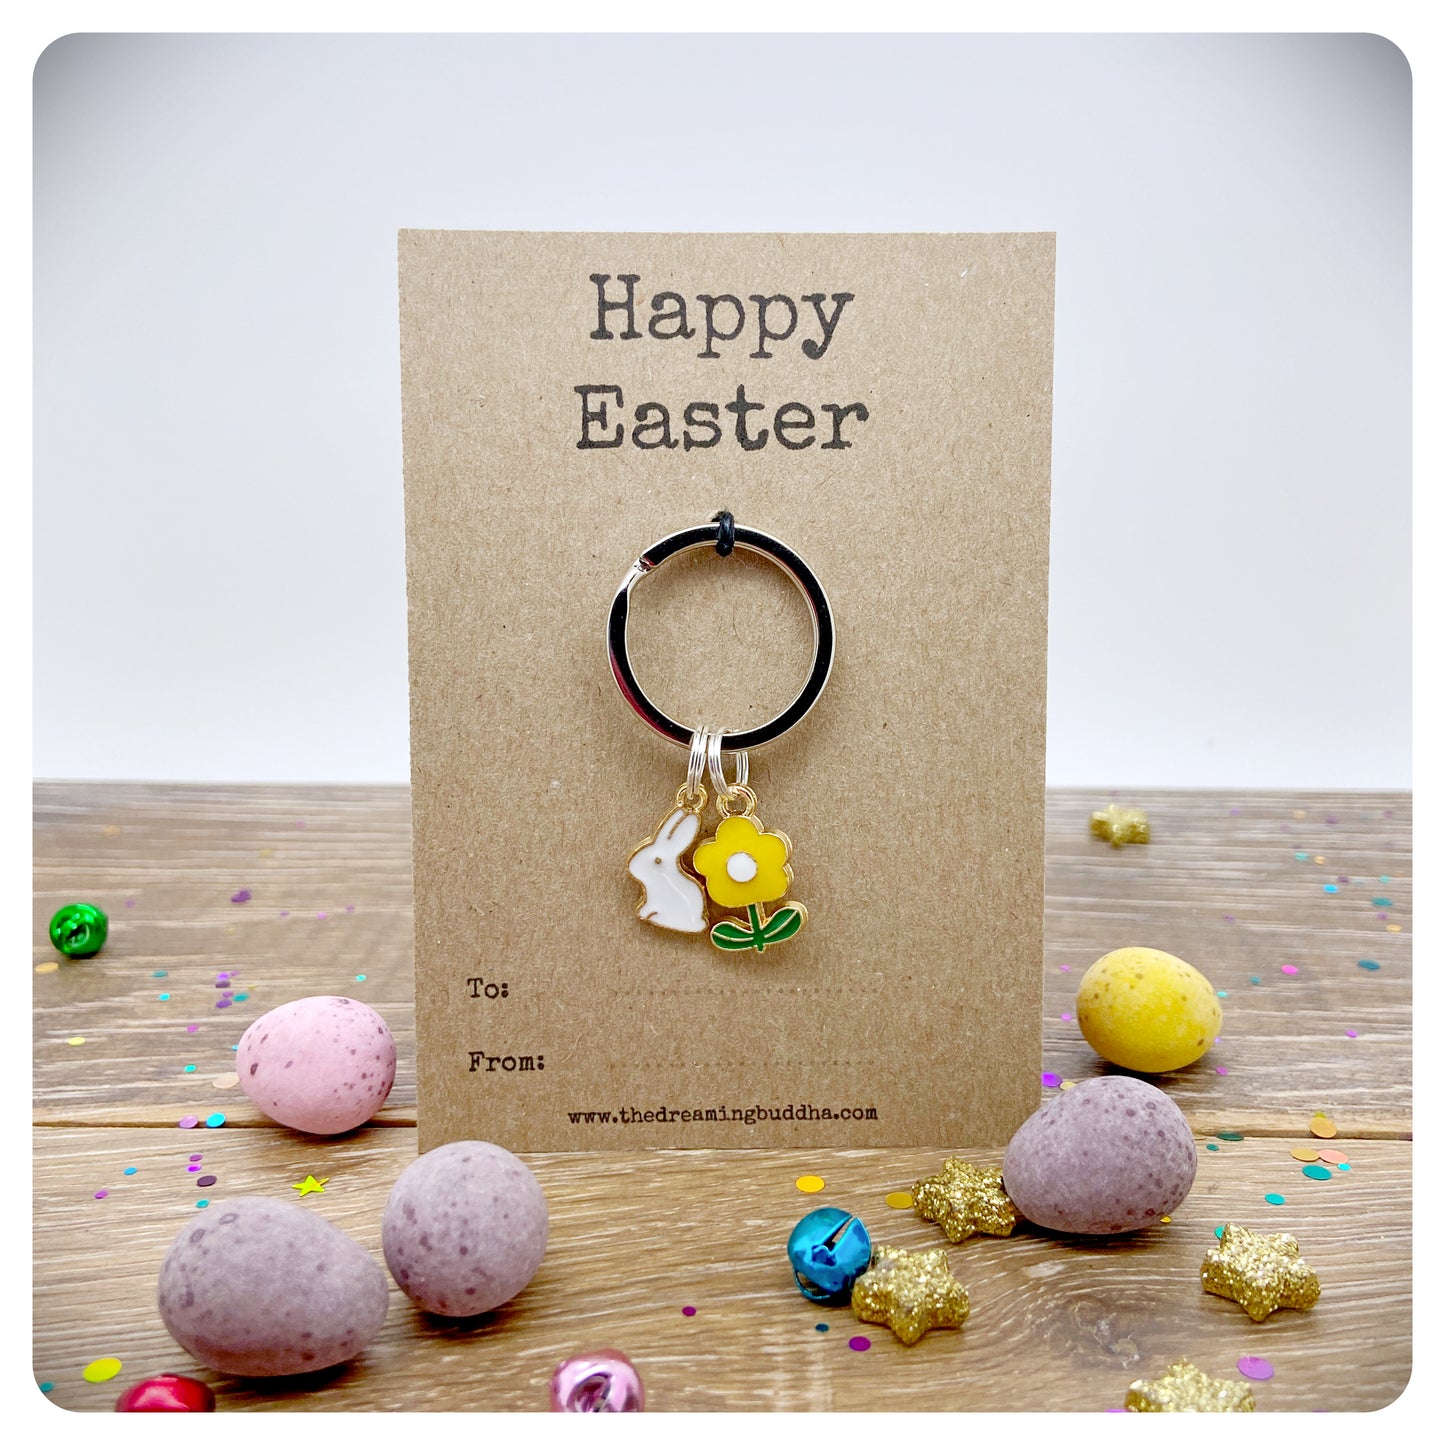 Happy Easter Keyring Card, Childrens Easter Bag Charm, Cute Flower Bunny Keychain, Easter Egg Hunt Gift, Easter Friends and Family Gift